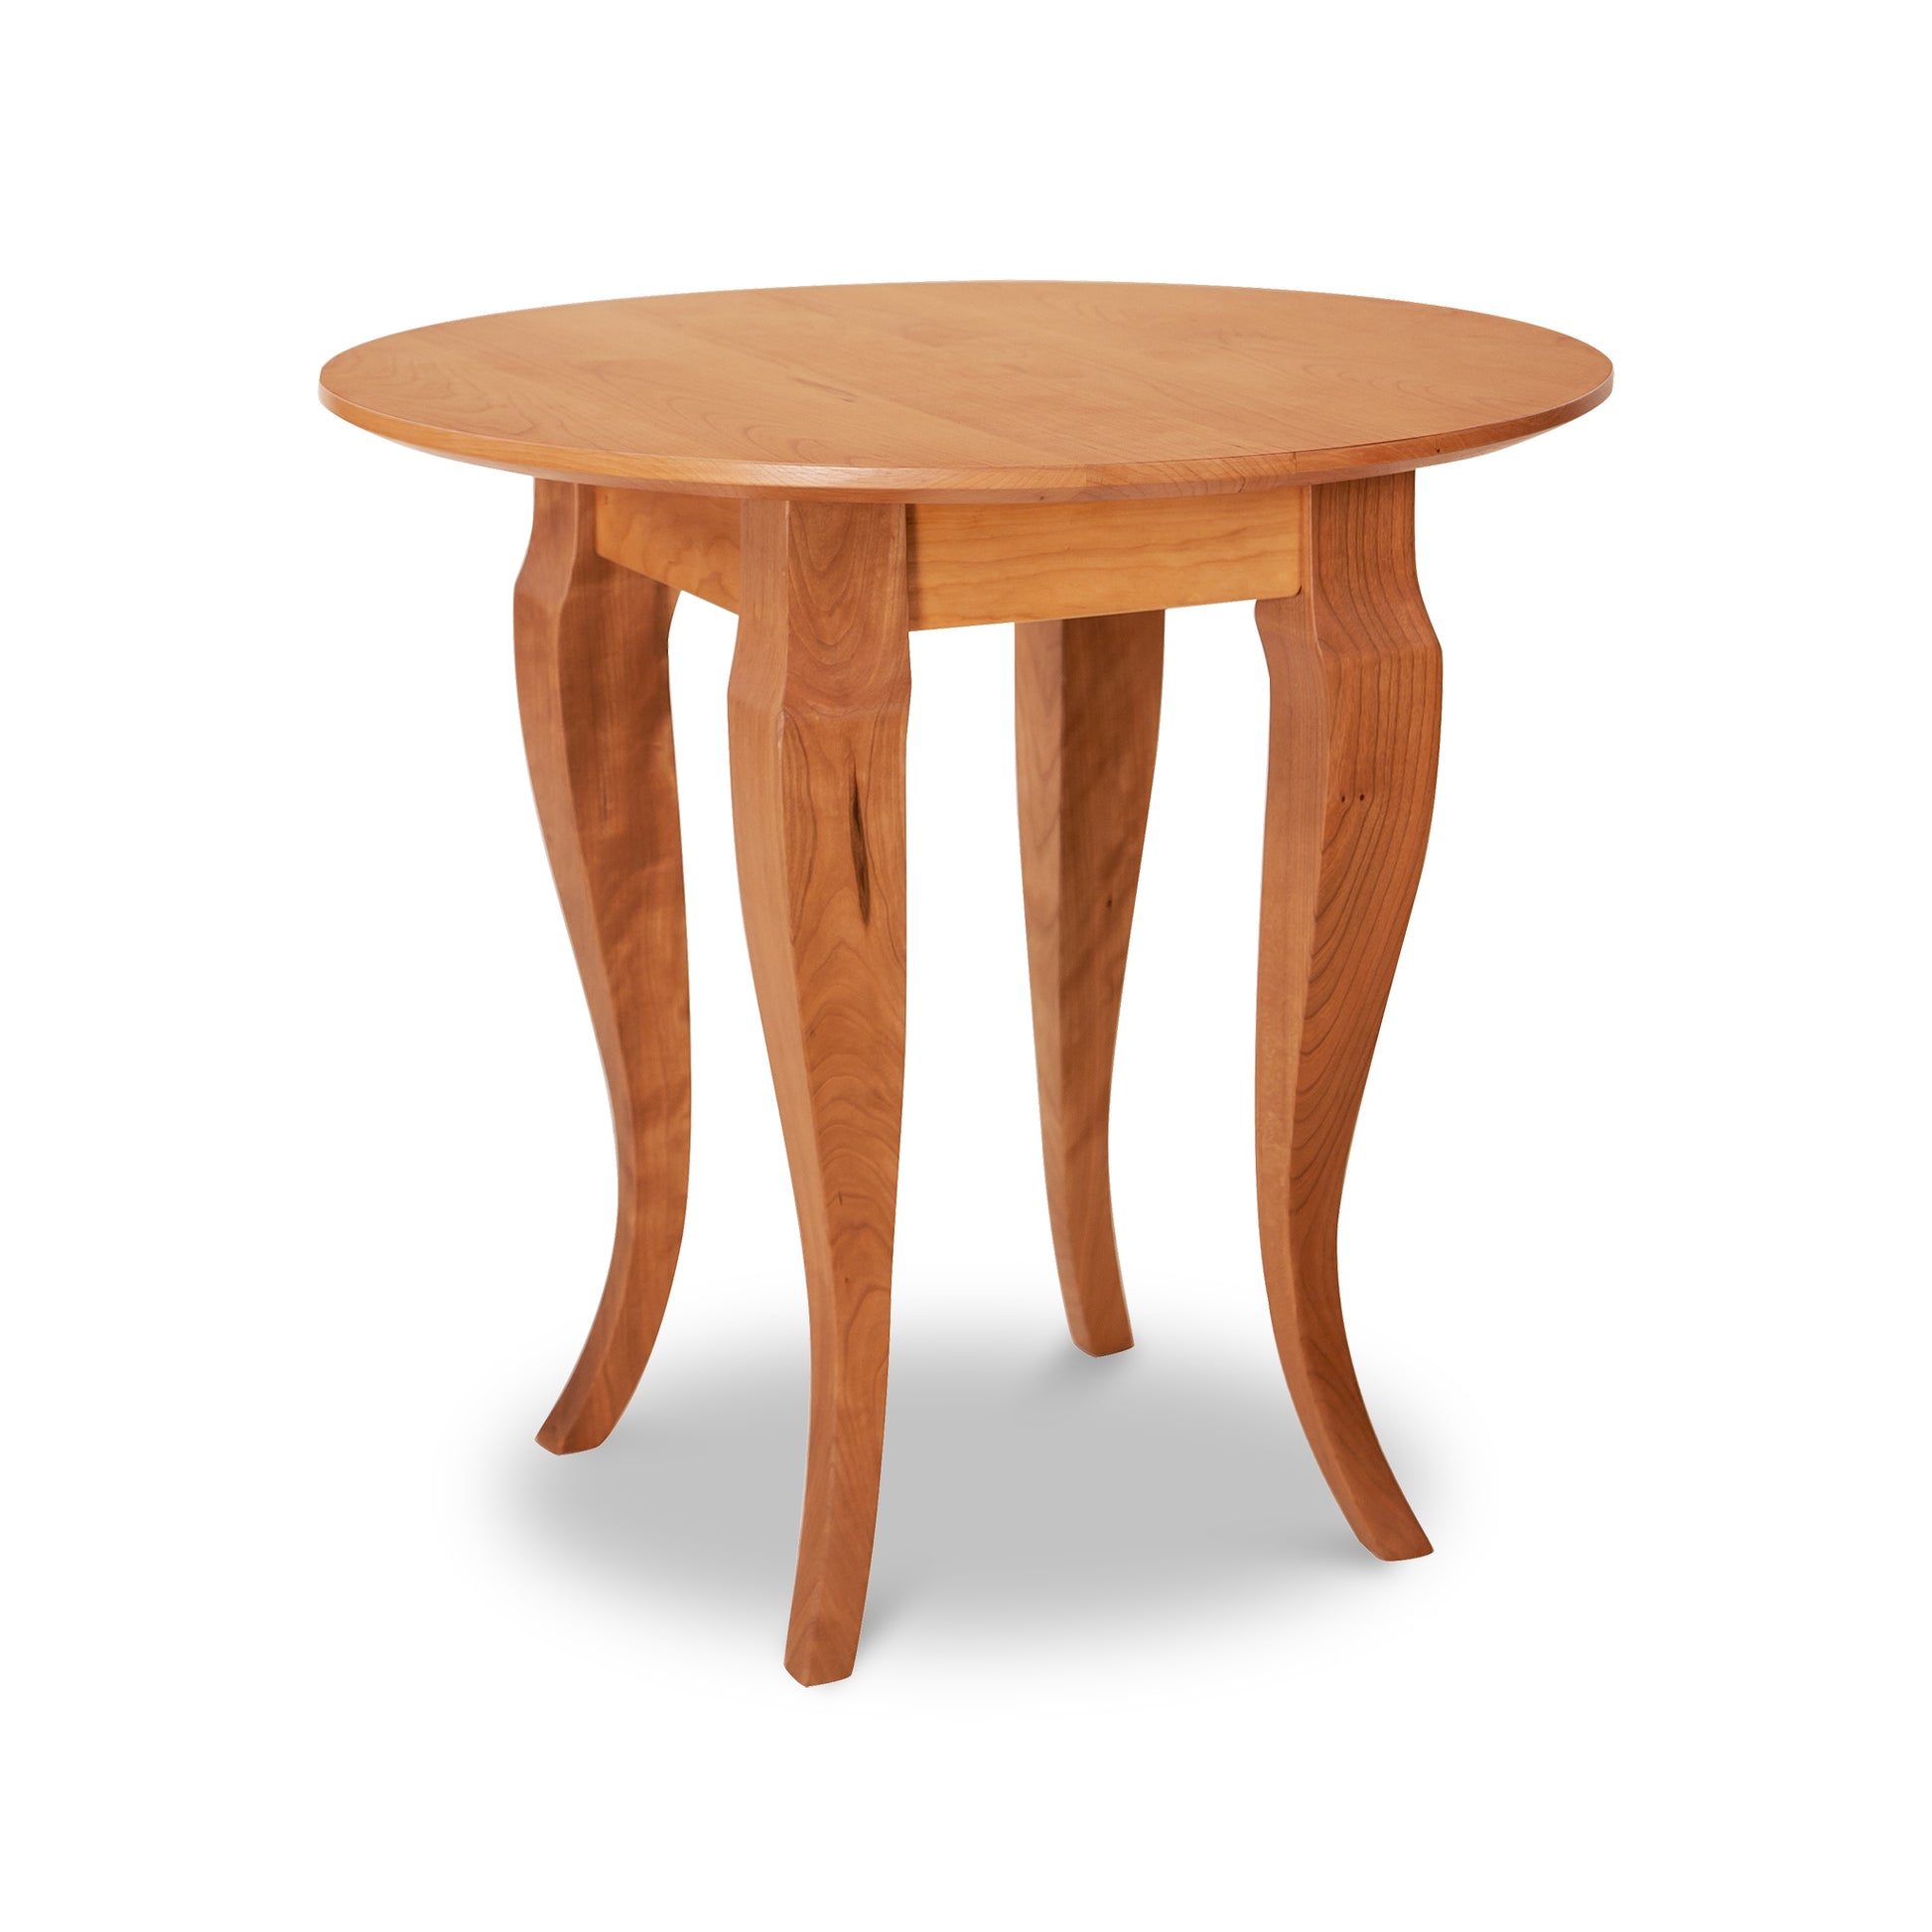 A Lyndon Furniture French Country round end table with a wooden top and legs, crafted from sustainable harvested solid woods. This high-end furniture piece exudes elegance and adds a touch of sophistication to any space.